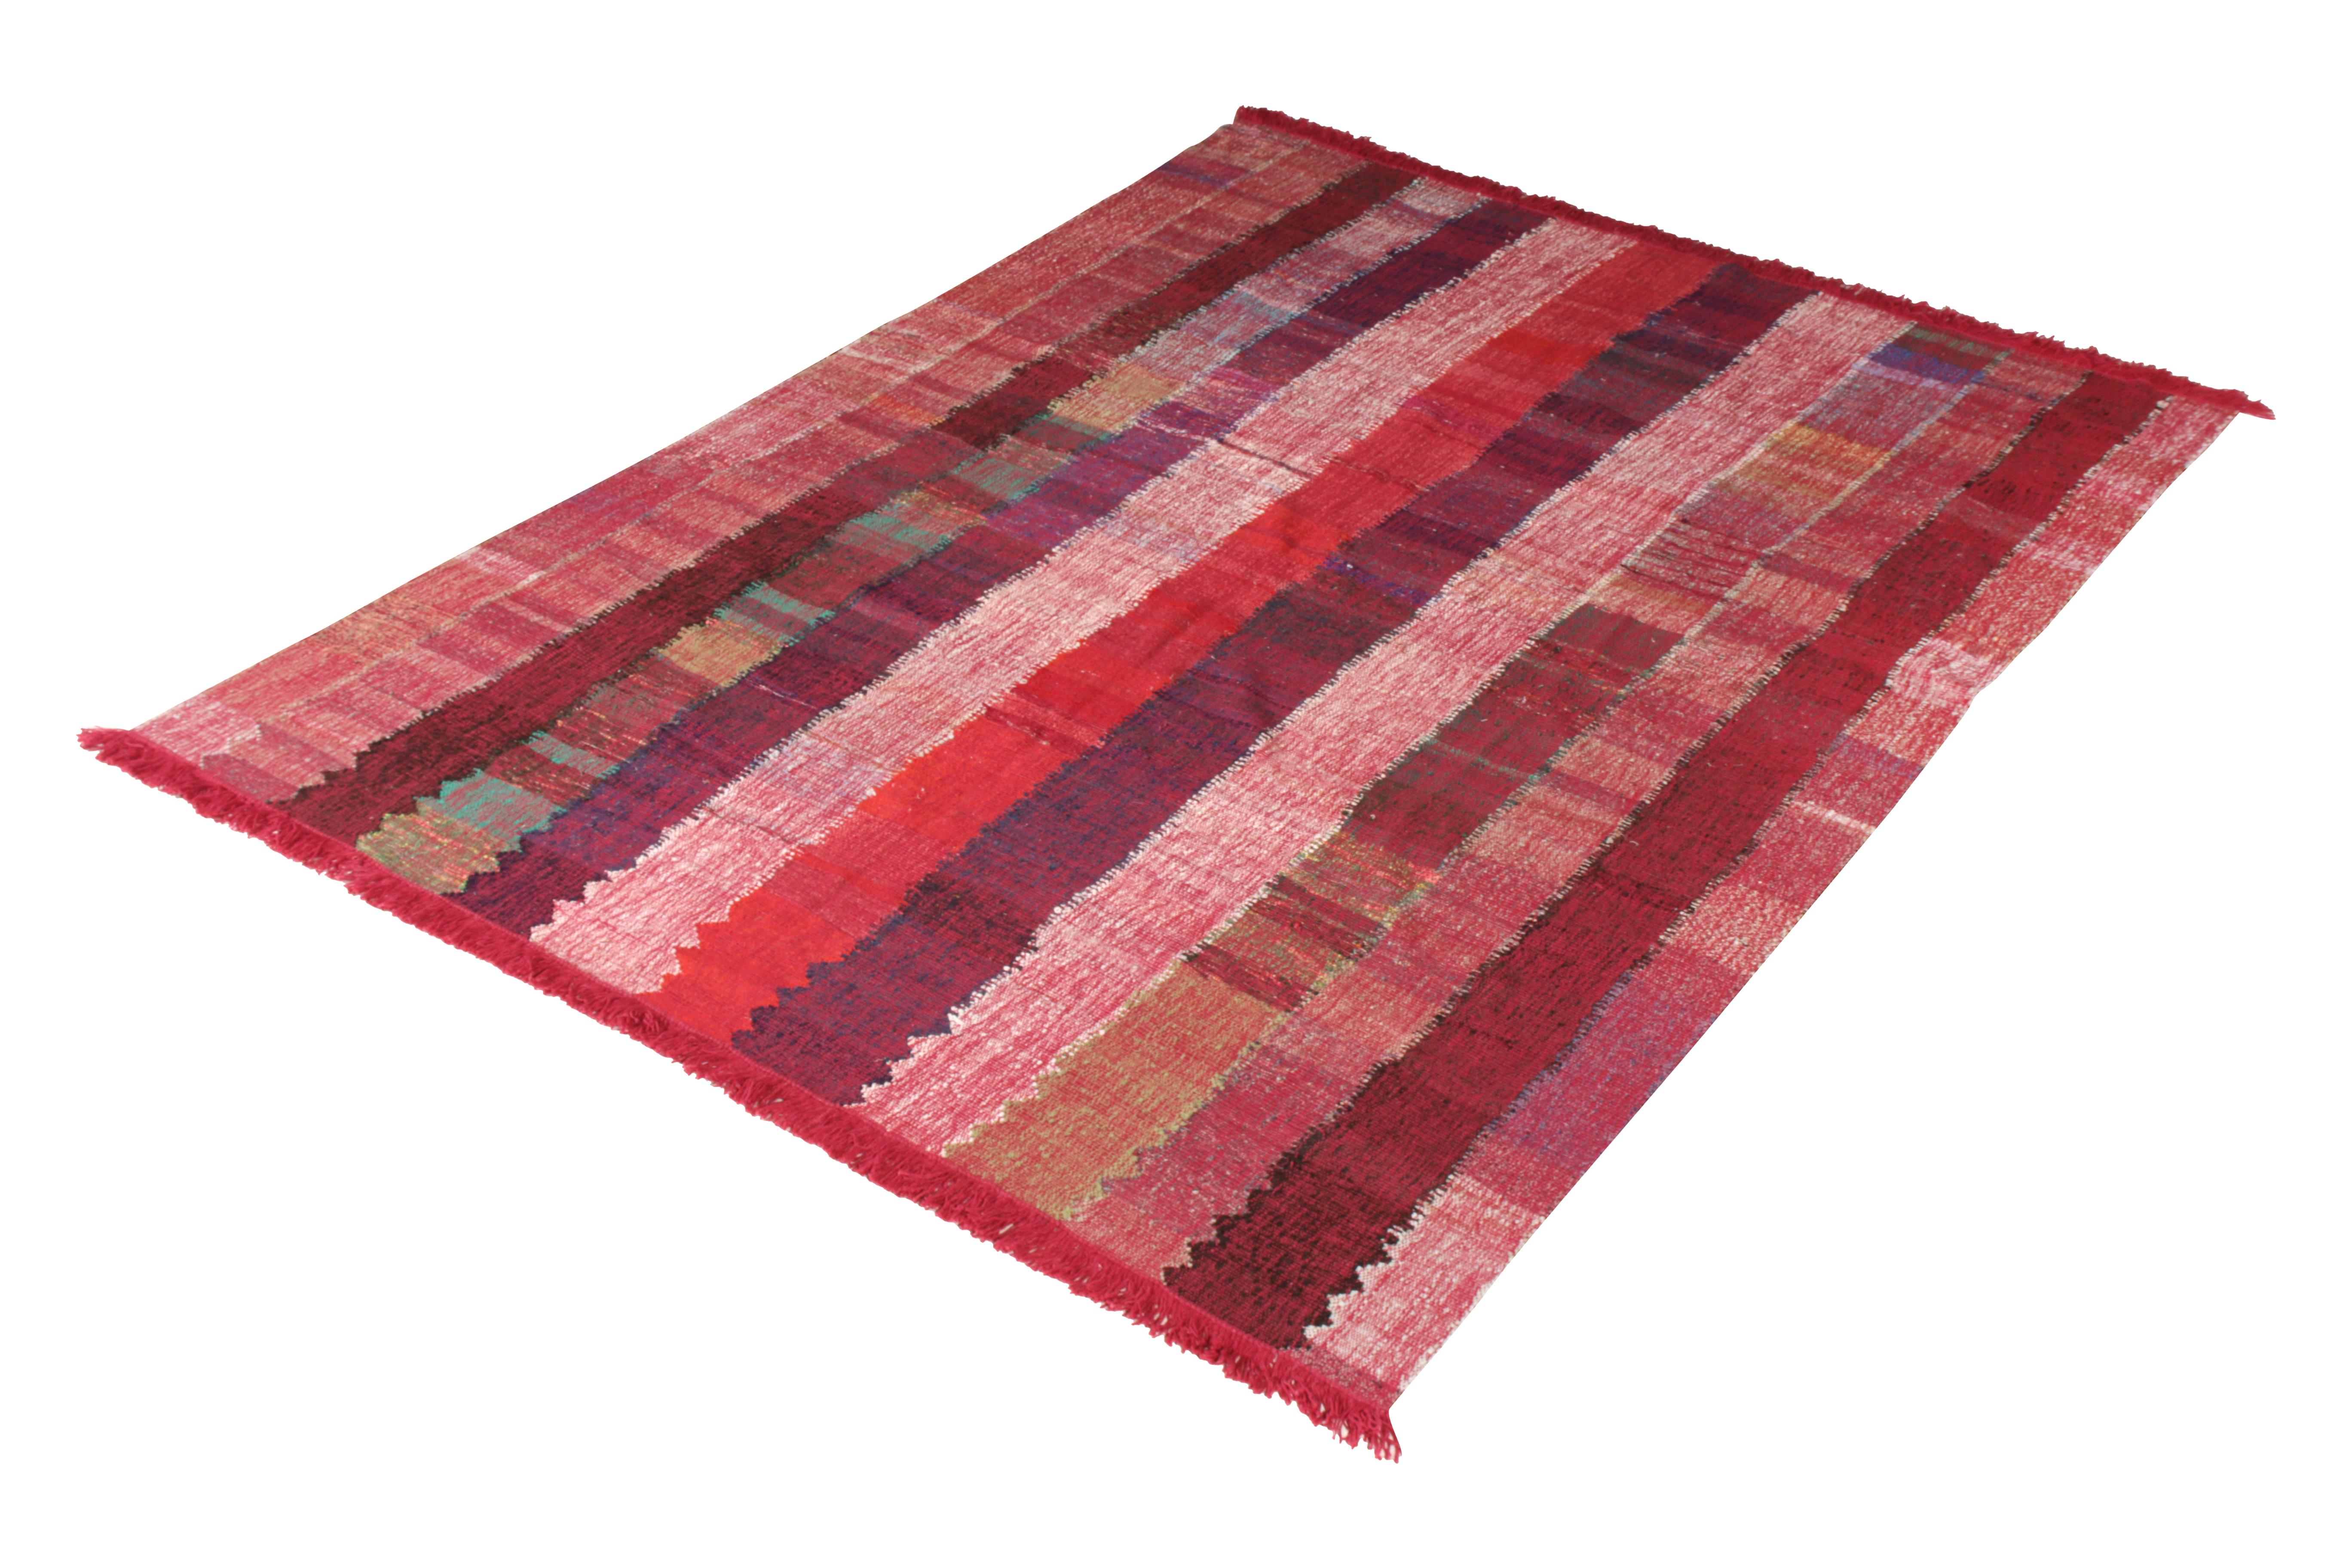 This modern Kilim represents a selection of distinct new patterns joining Rug & Kilim’s titular Kilim & flat-weave collection, with this piece representing a sub collection uniquely handwoven from the yarns of Classic textiles and Kilims to create